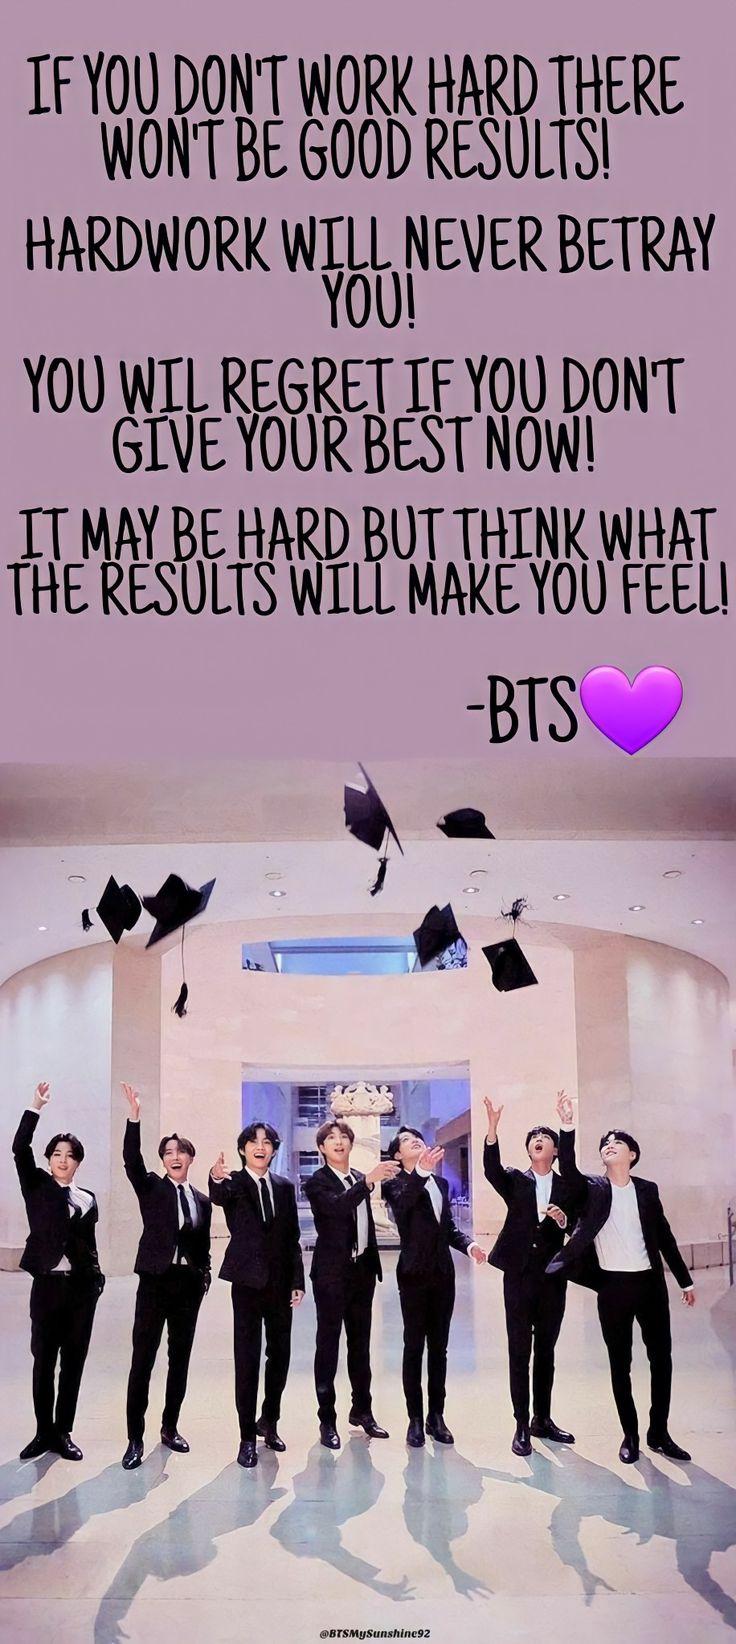 BTS STUDY MOTIVATIONAL WALLPAPER Inspirational quotes for